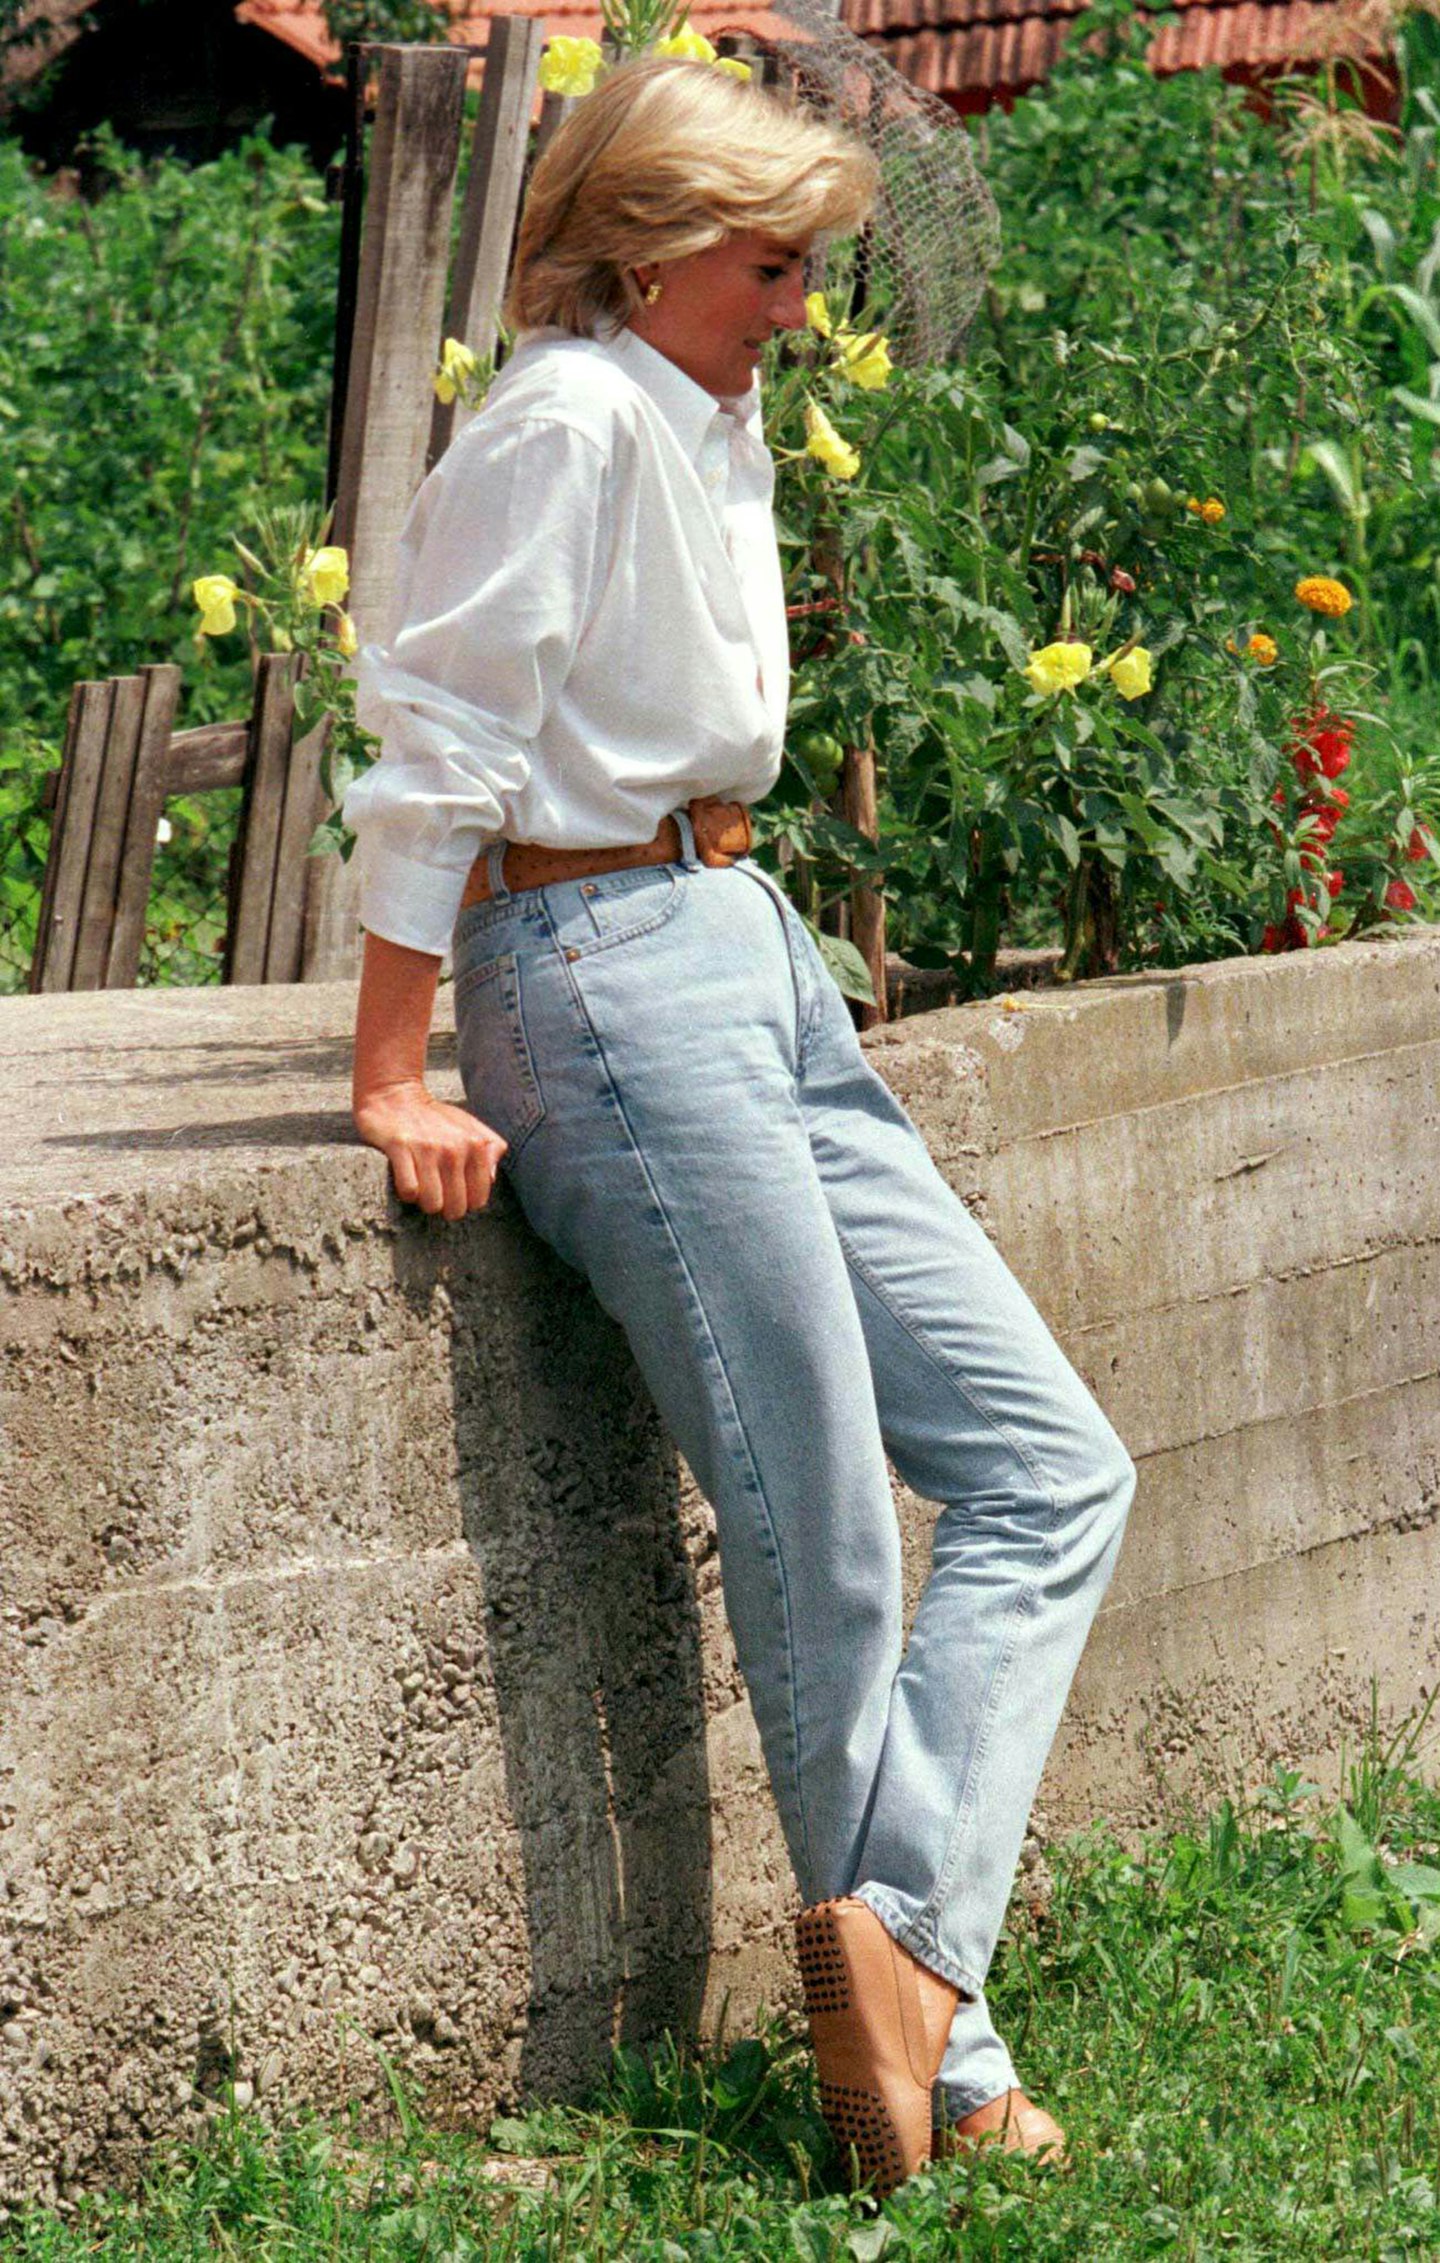 Princess Diana wearing a white shirt and jeans 